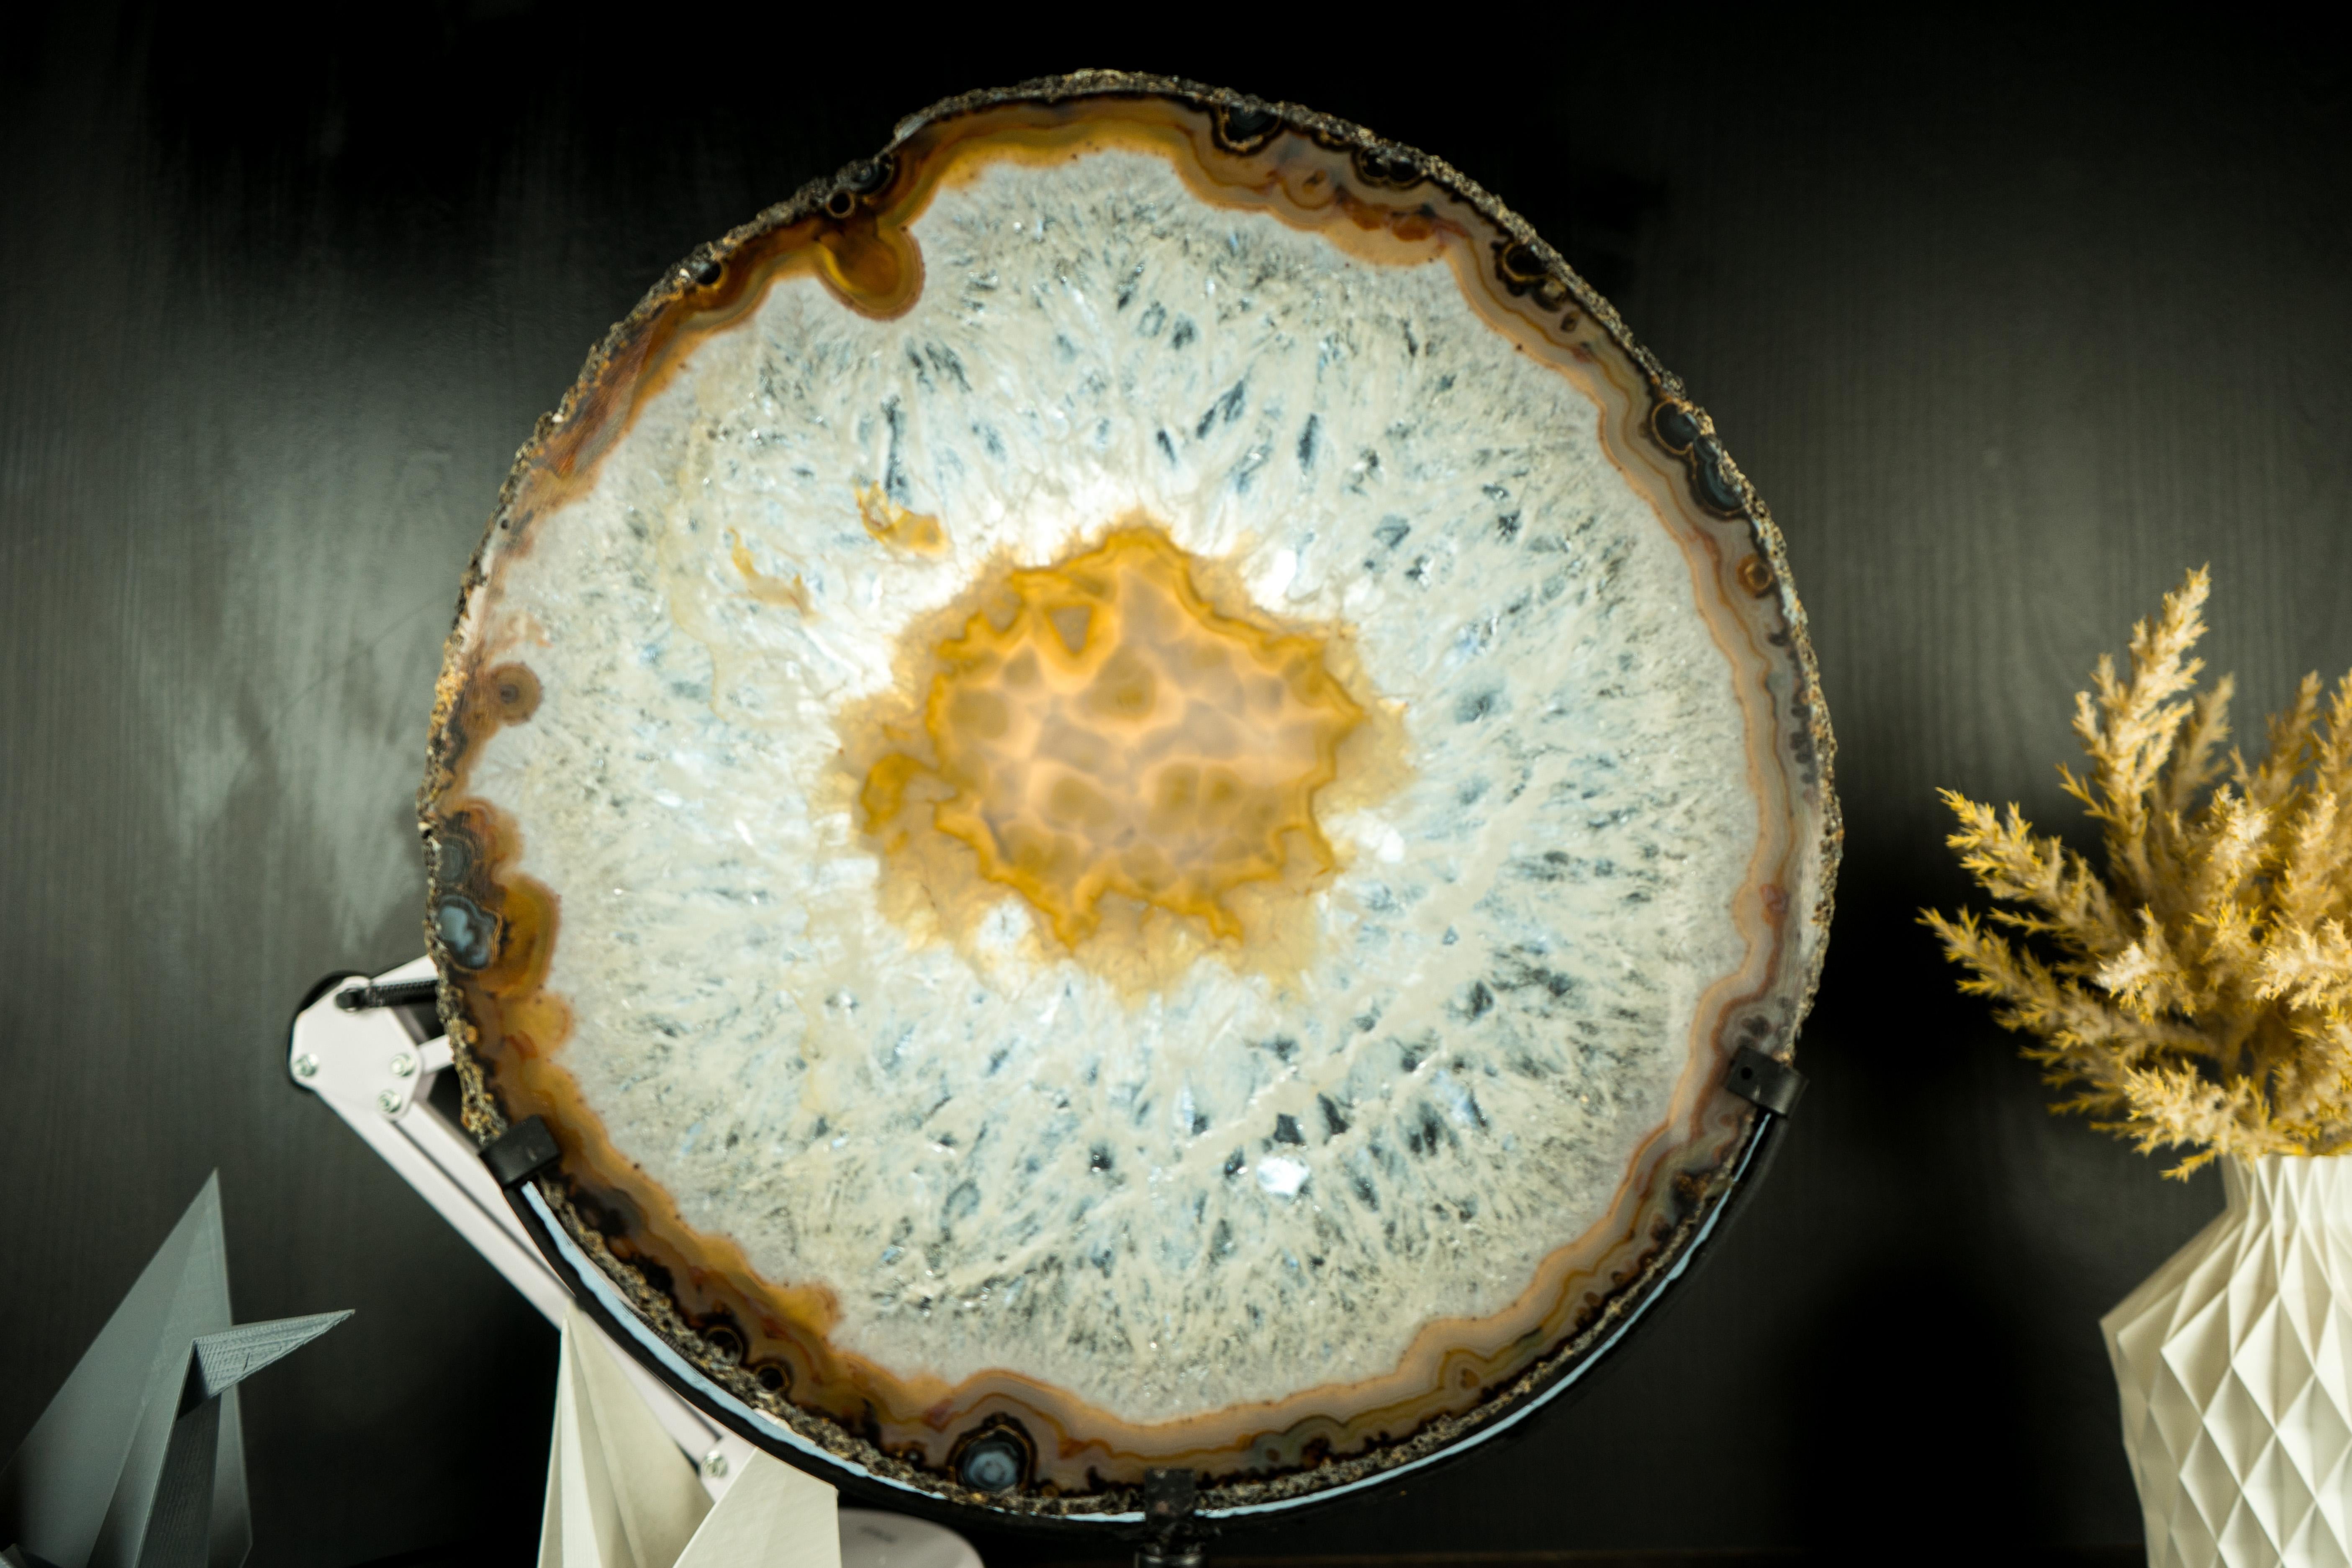 World-Class Large Lace Agate Slice, with Ice-Like Crystal and Colorful Agate For Sale 10